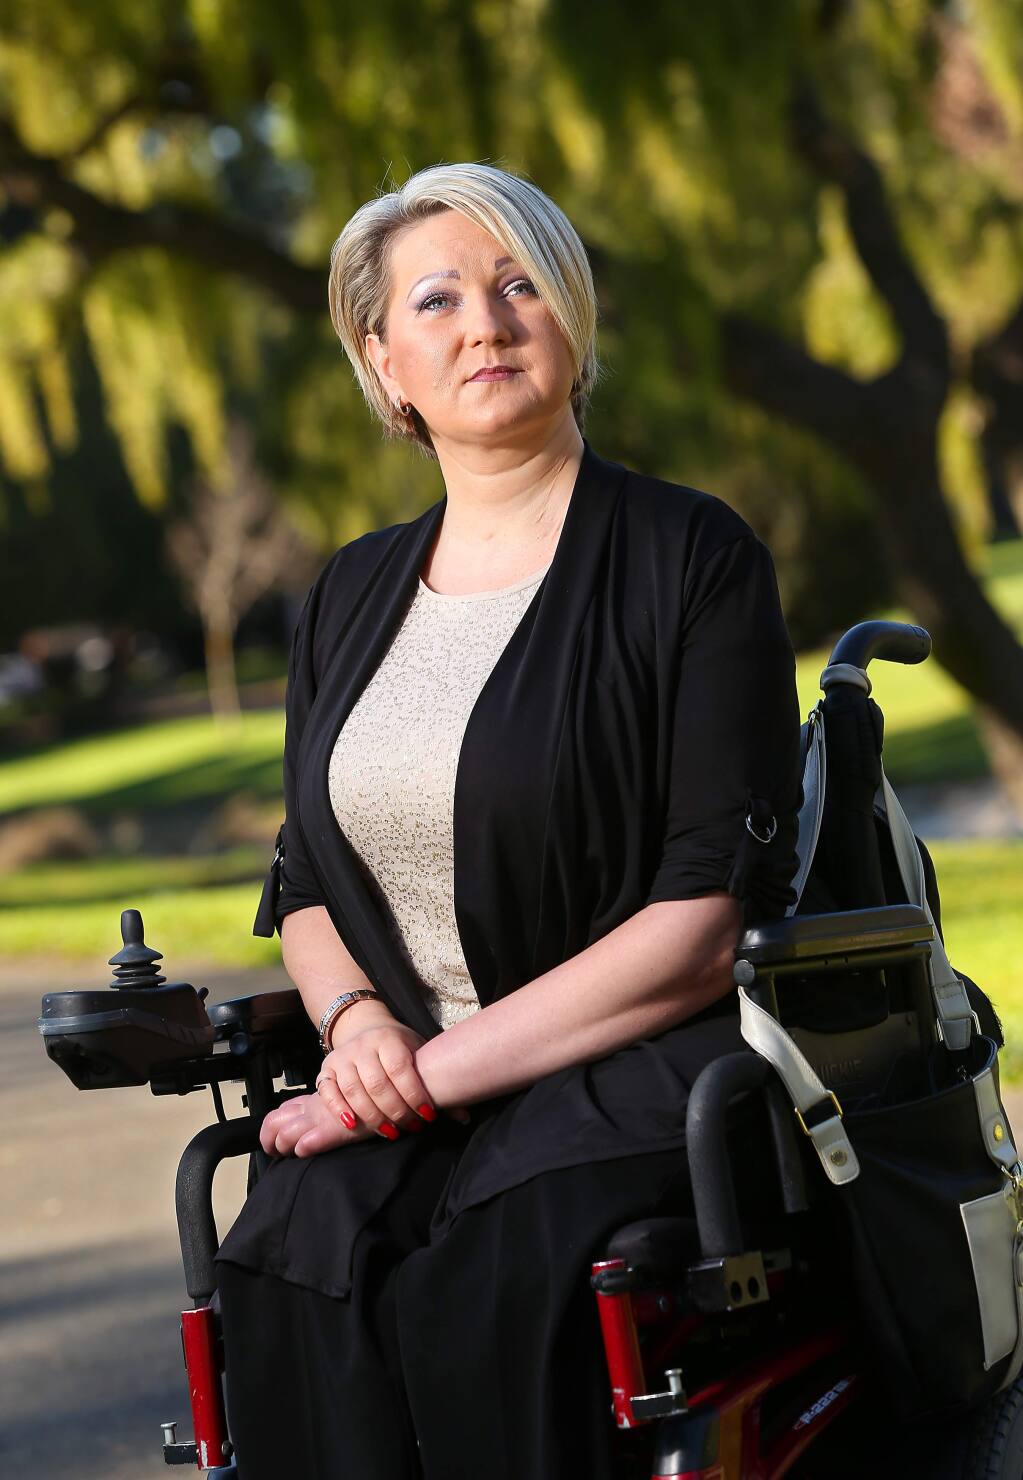 Inga Lizdenyte lost both her legs and the use of one arm at the age of 22 when she was in a car crash that killed her boyfriend. She is now a life coach, speaker and author.(Christopher Chung/ The Press Democrat)